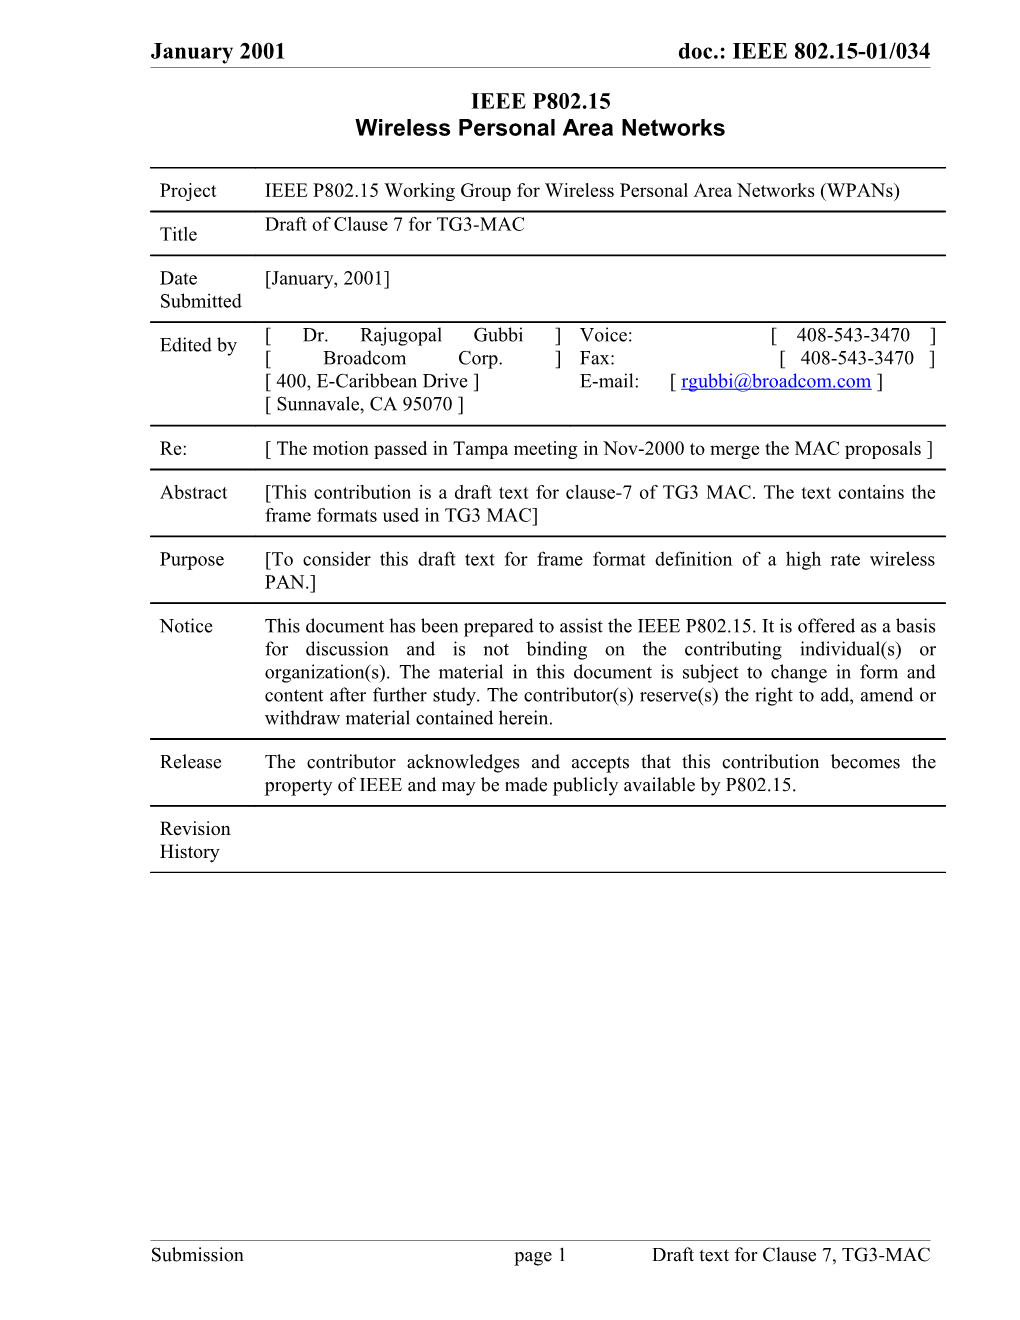 Doc.: IEEE 802.15-3/Clause 7